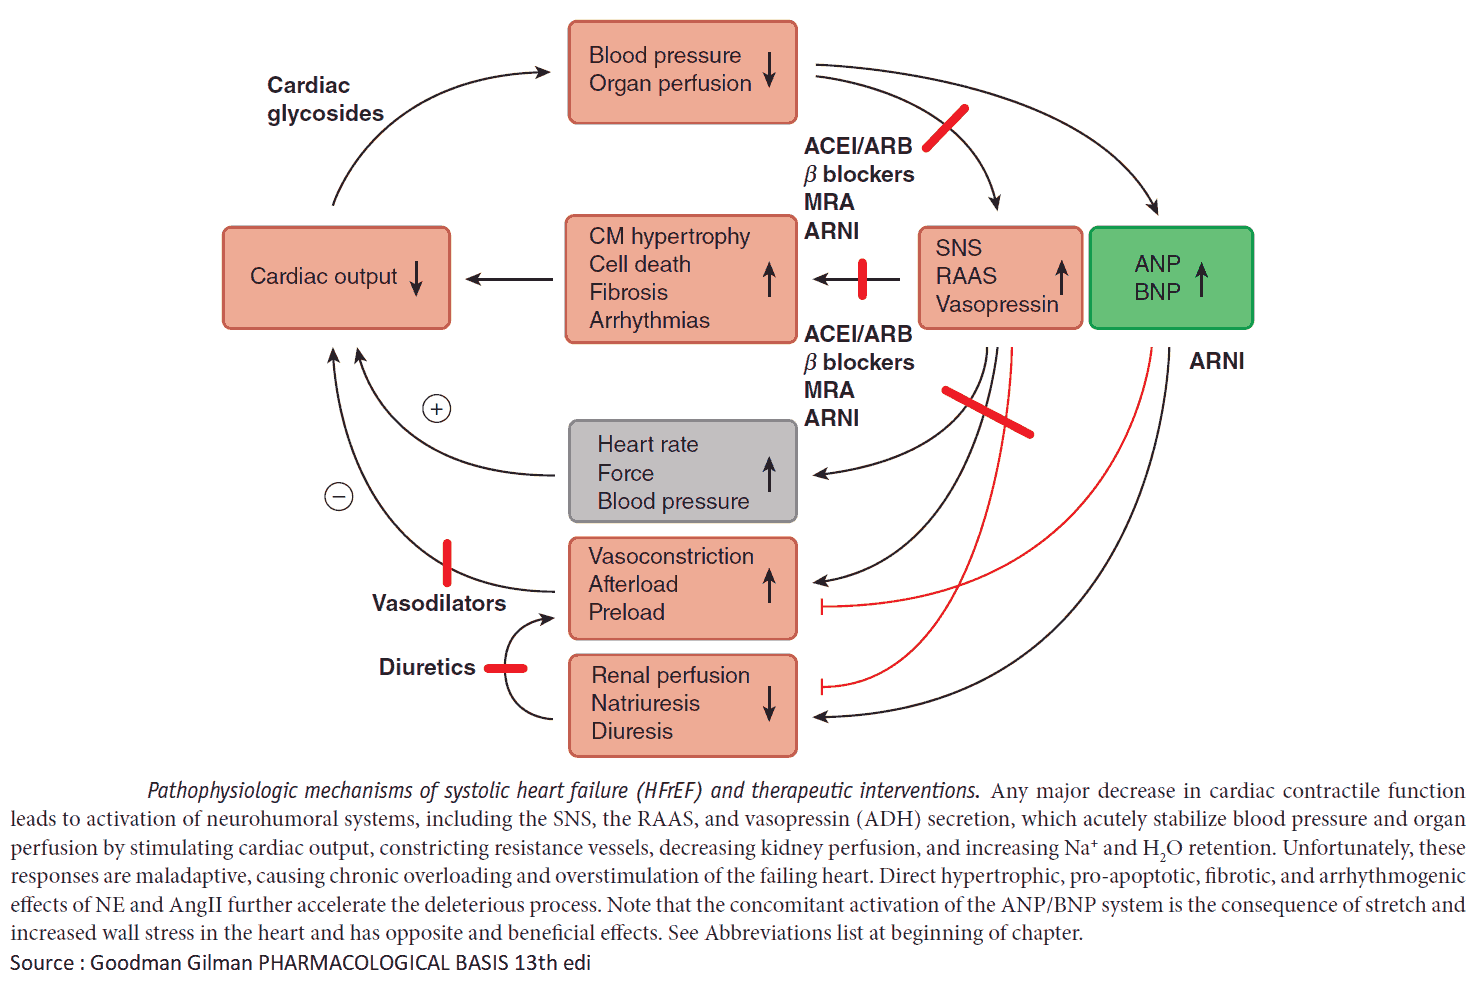 Pathophysiologic mechanisms of systolic heart failure (HFrEF) and therapeutic interventions